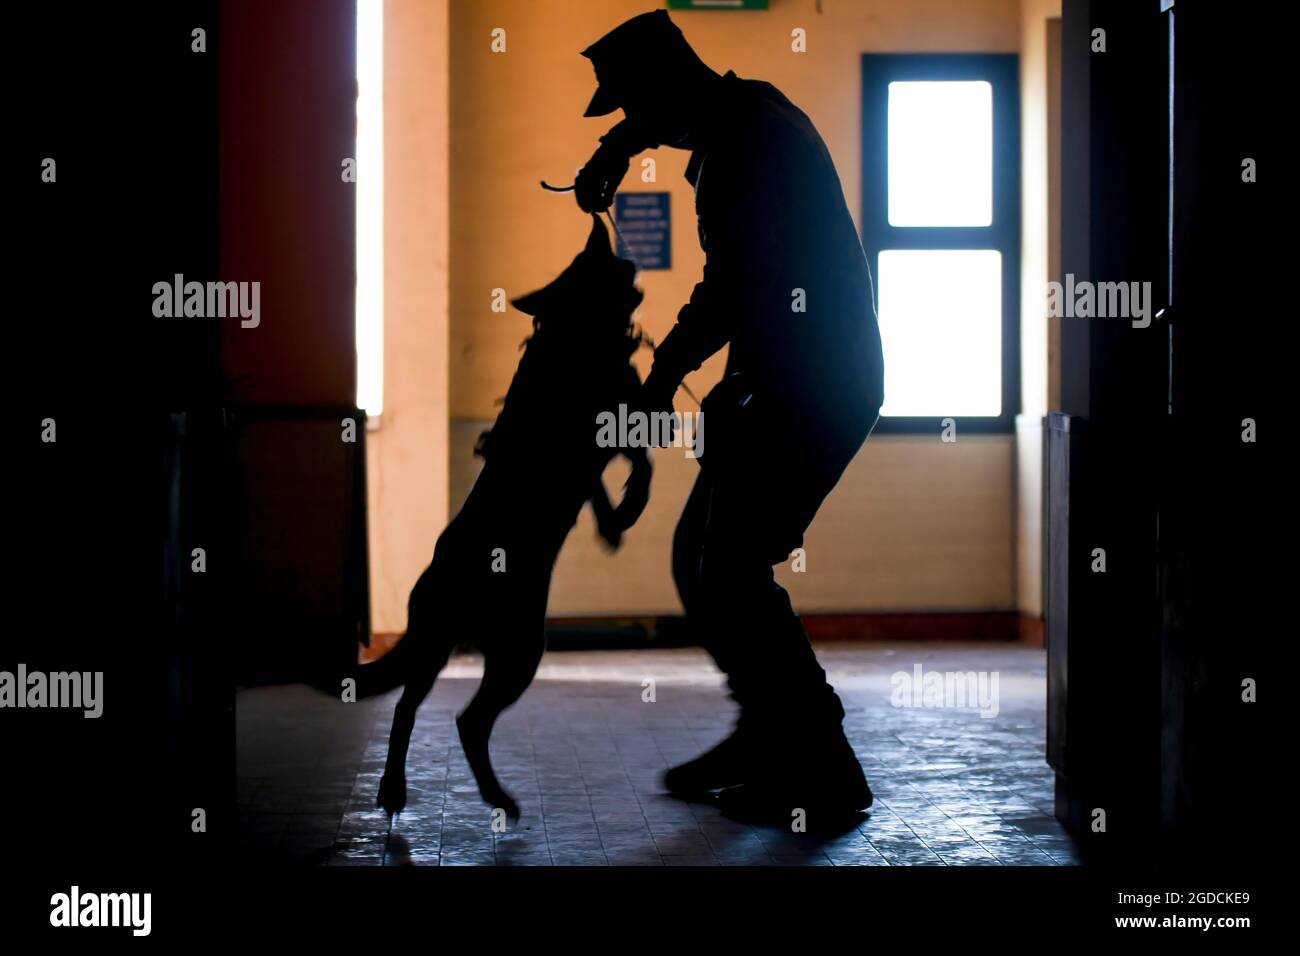 Master-at-Arms 2nd Class Devon Weston, assigned to Naval Support Activity Naples security department, and Military Working Dog Debi, participate in an explosive detection evolution, Feb. 11, 2021. NSA Naples is an operational ashore base that enables U.S., allied, and partner nation forces to be where they are needed, when they are needed to ensure security and stability in Europe, Africa, and Southwest Asia. (U.S. Navy photo by Mass Communication Specialist 1st Class Donavan K. Patubo) Stock Photo